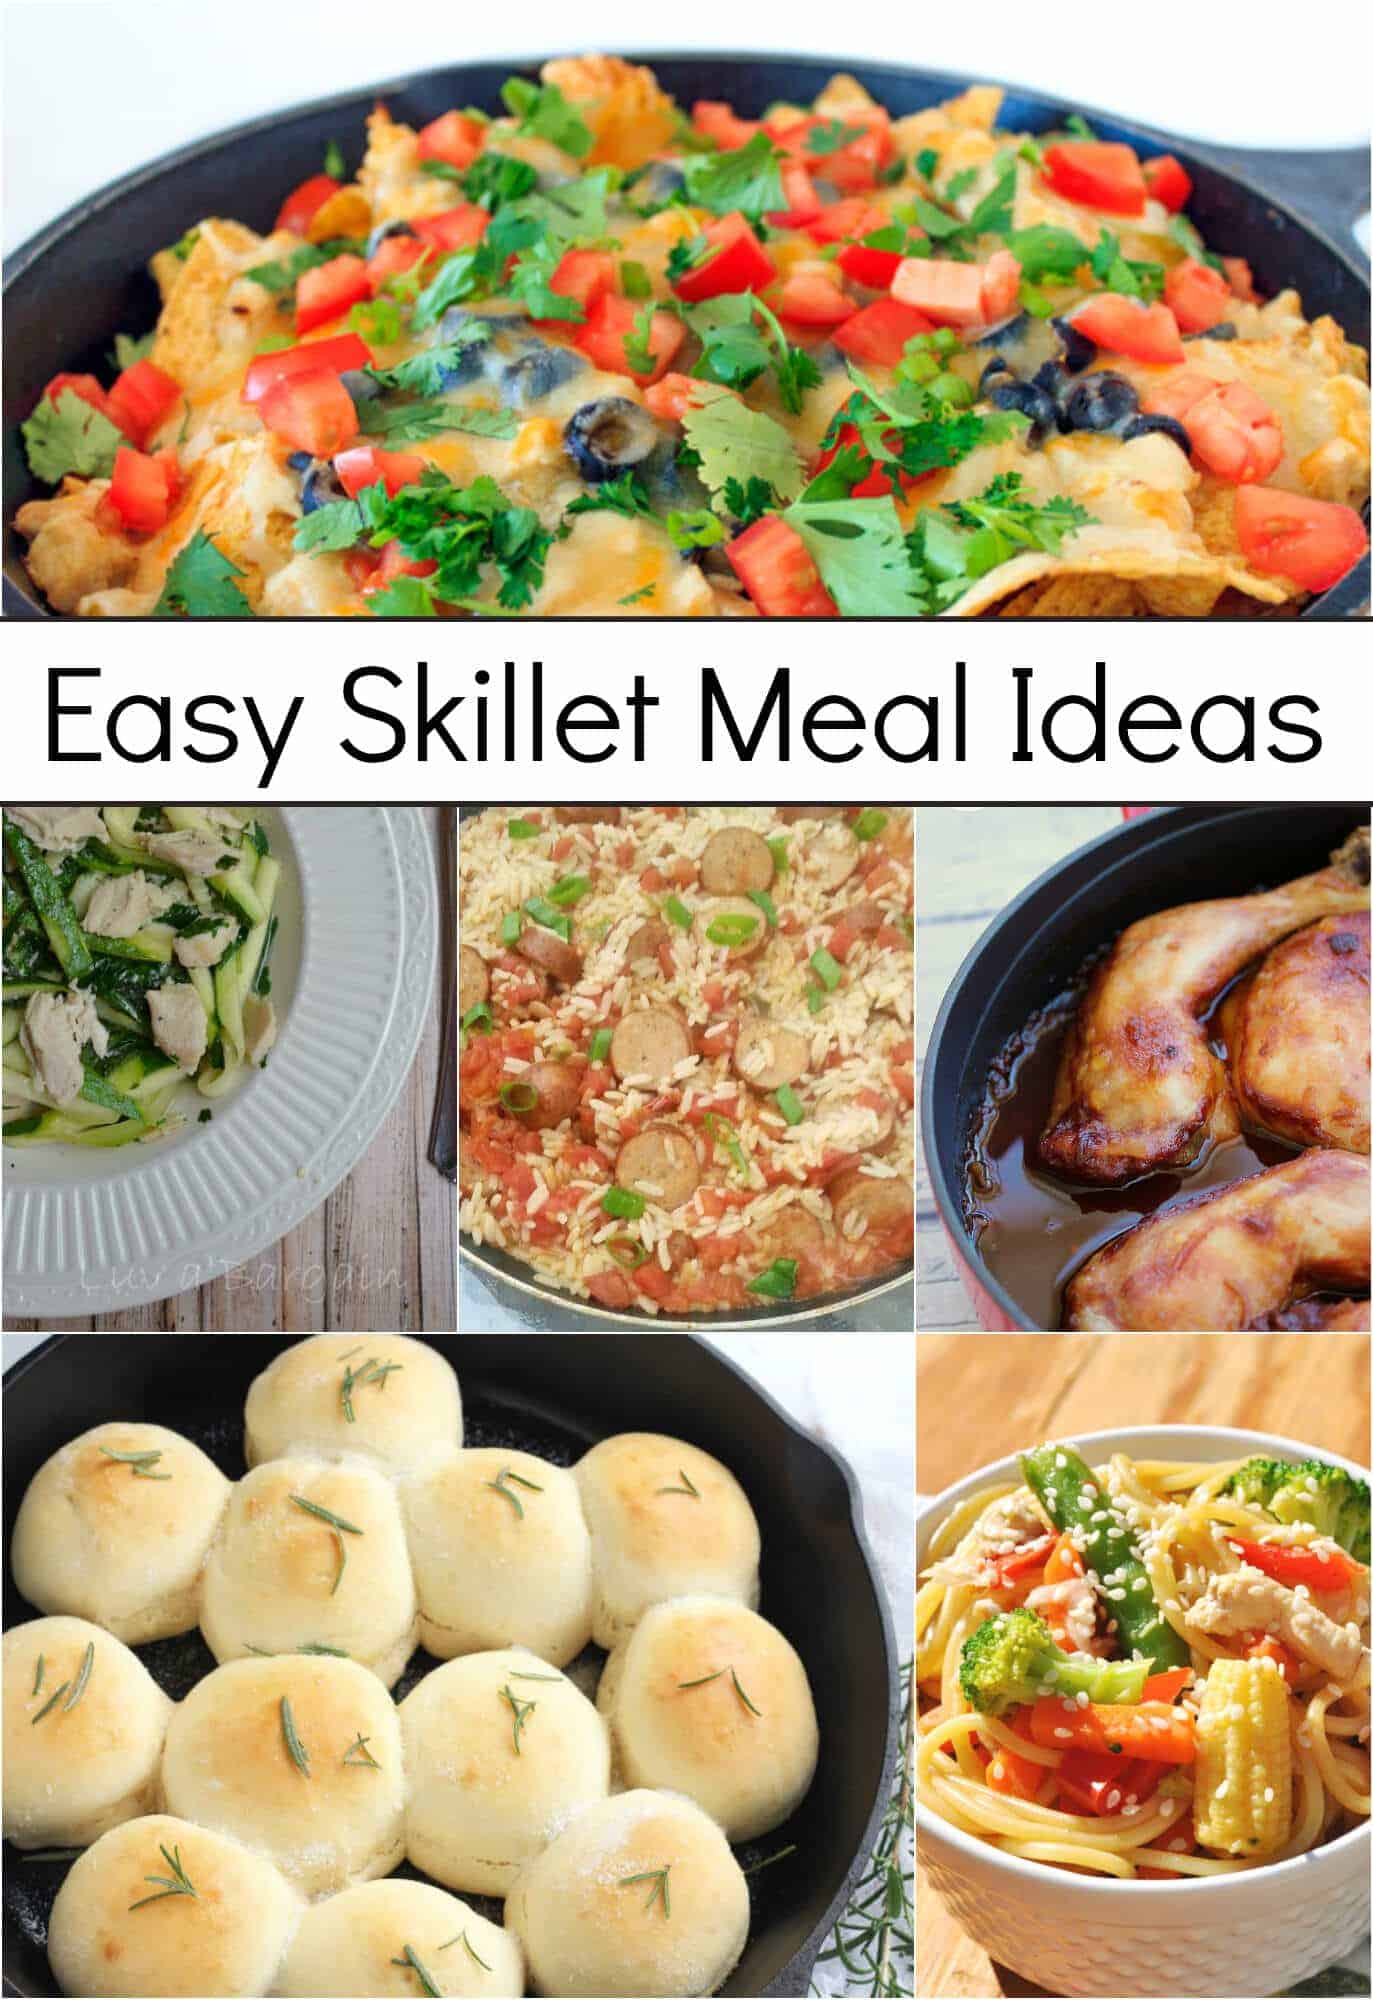 Easy Skillet Meal Ideas by Princess Pinky Girl